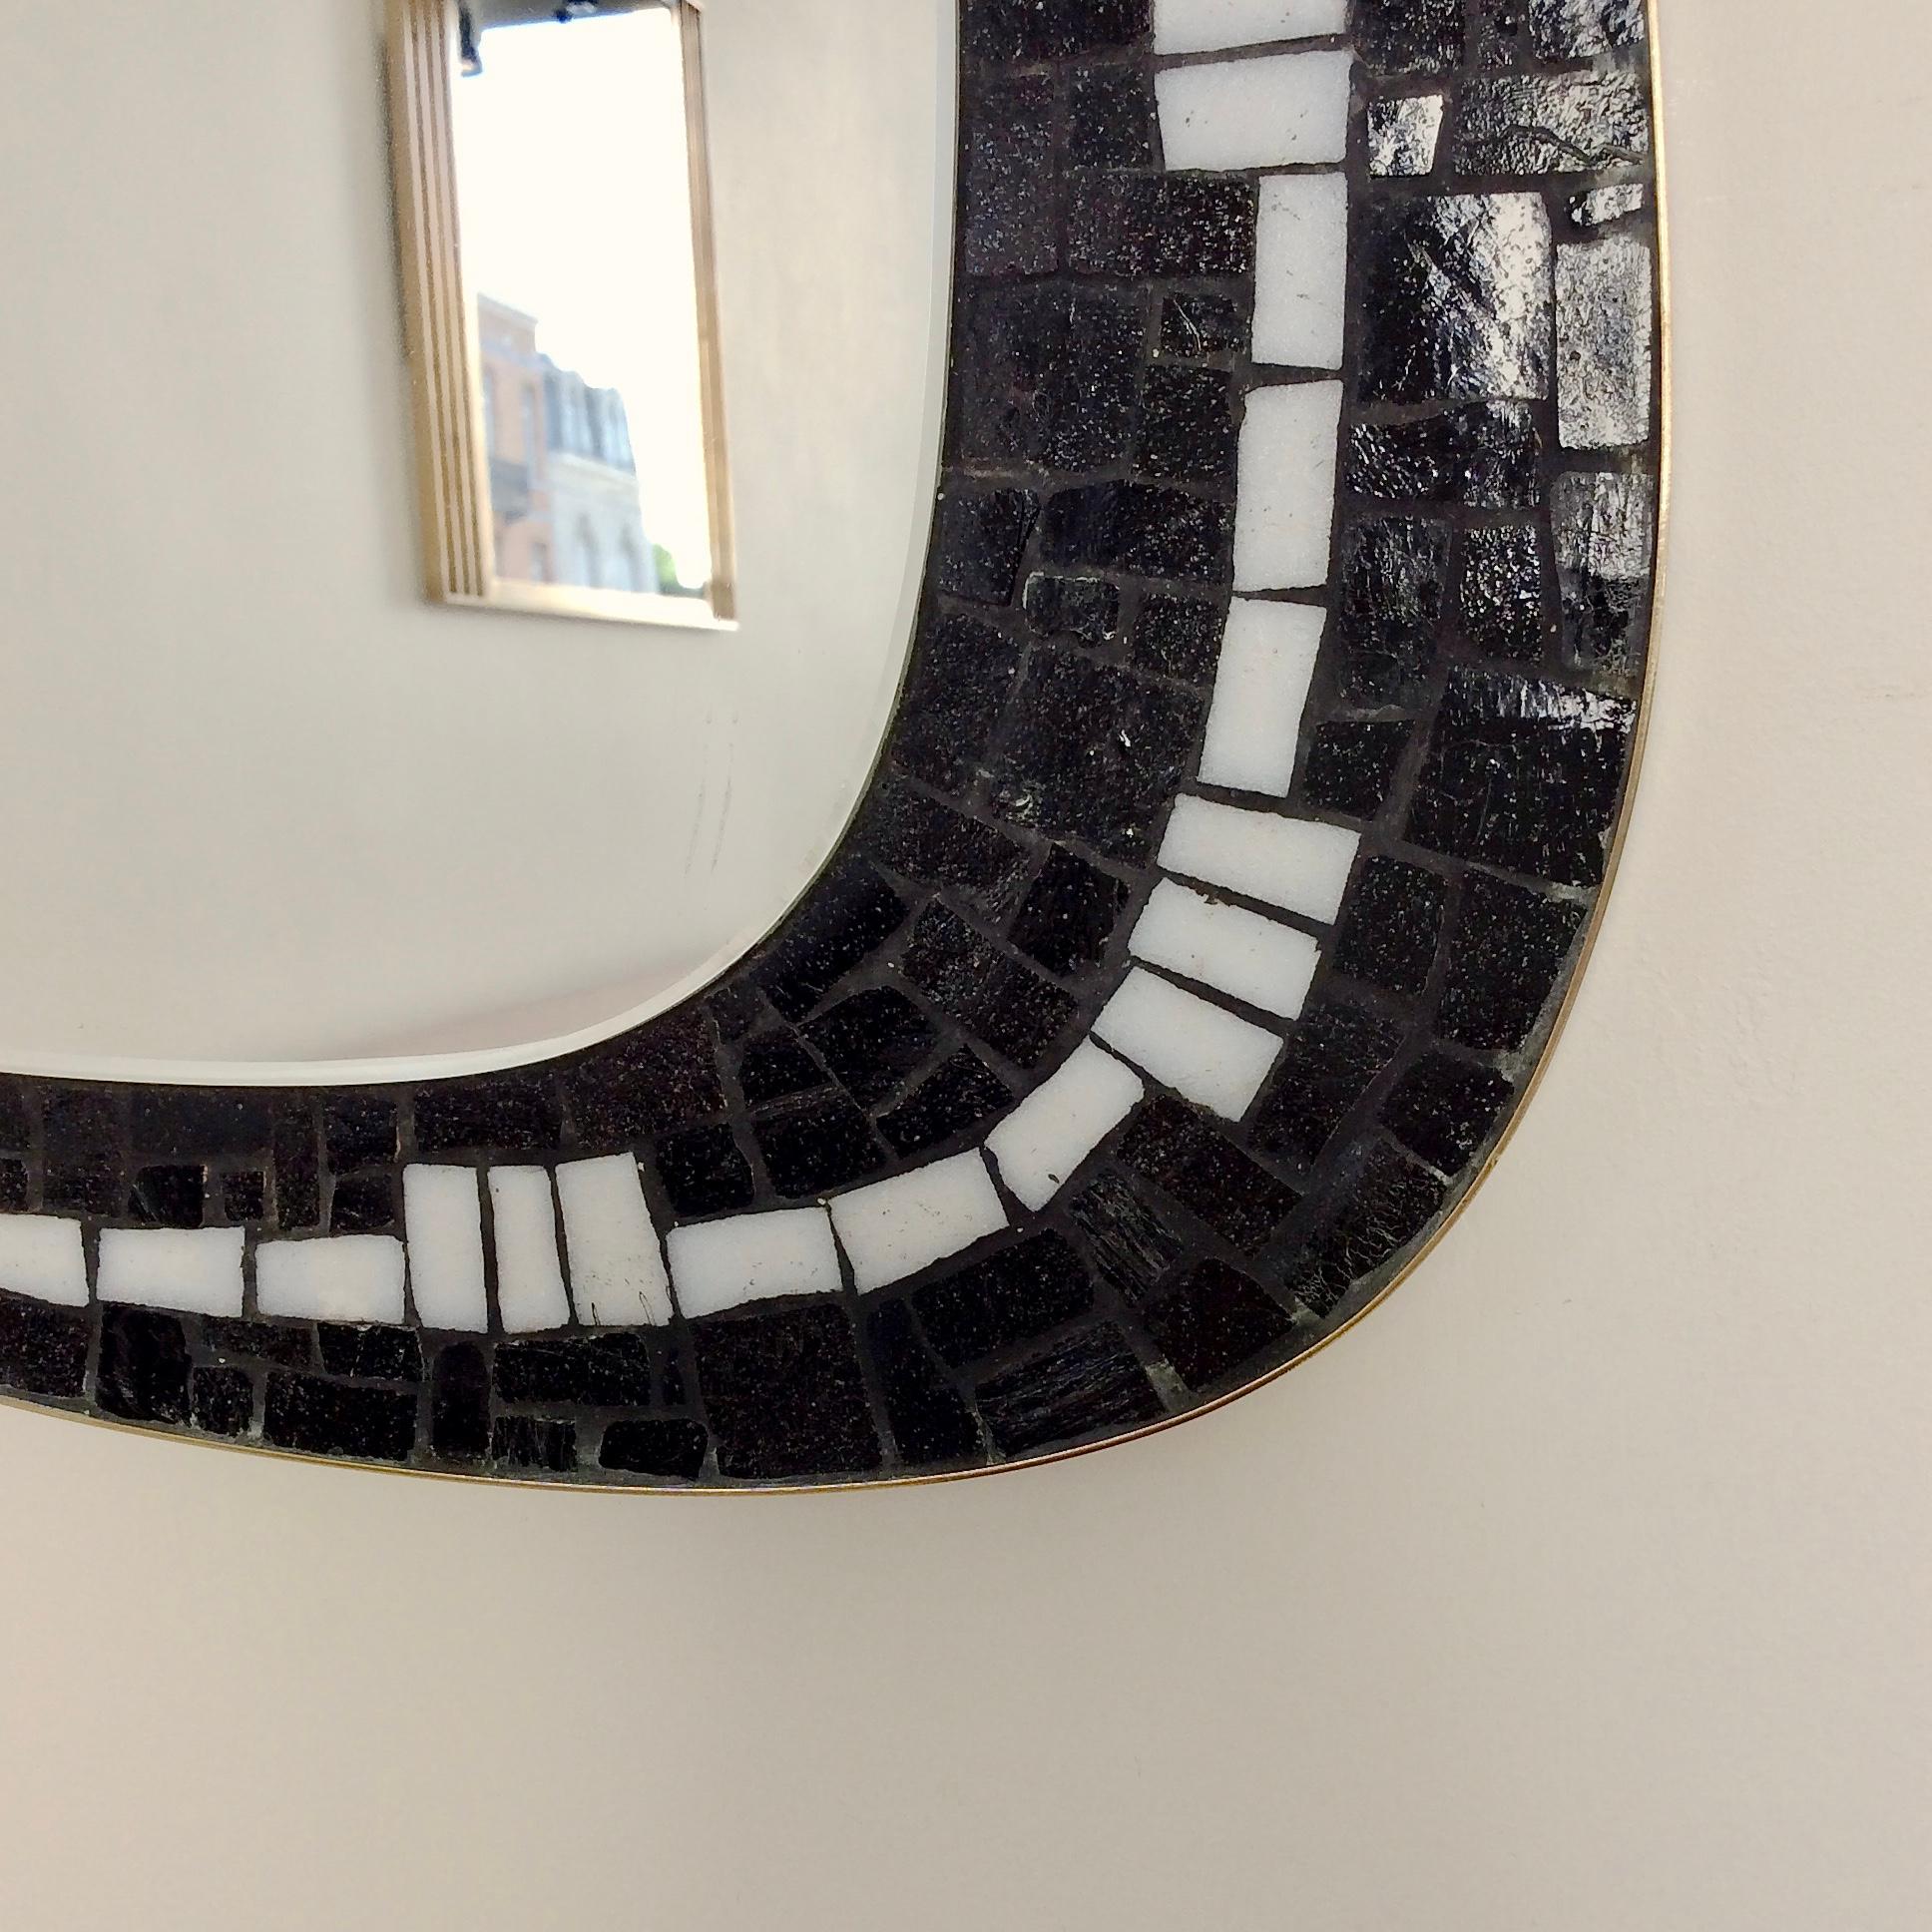 Mid-20th Century Berthold Müller Asymetrical Wall Mirror, circa 1950, Germany.